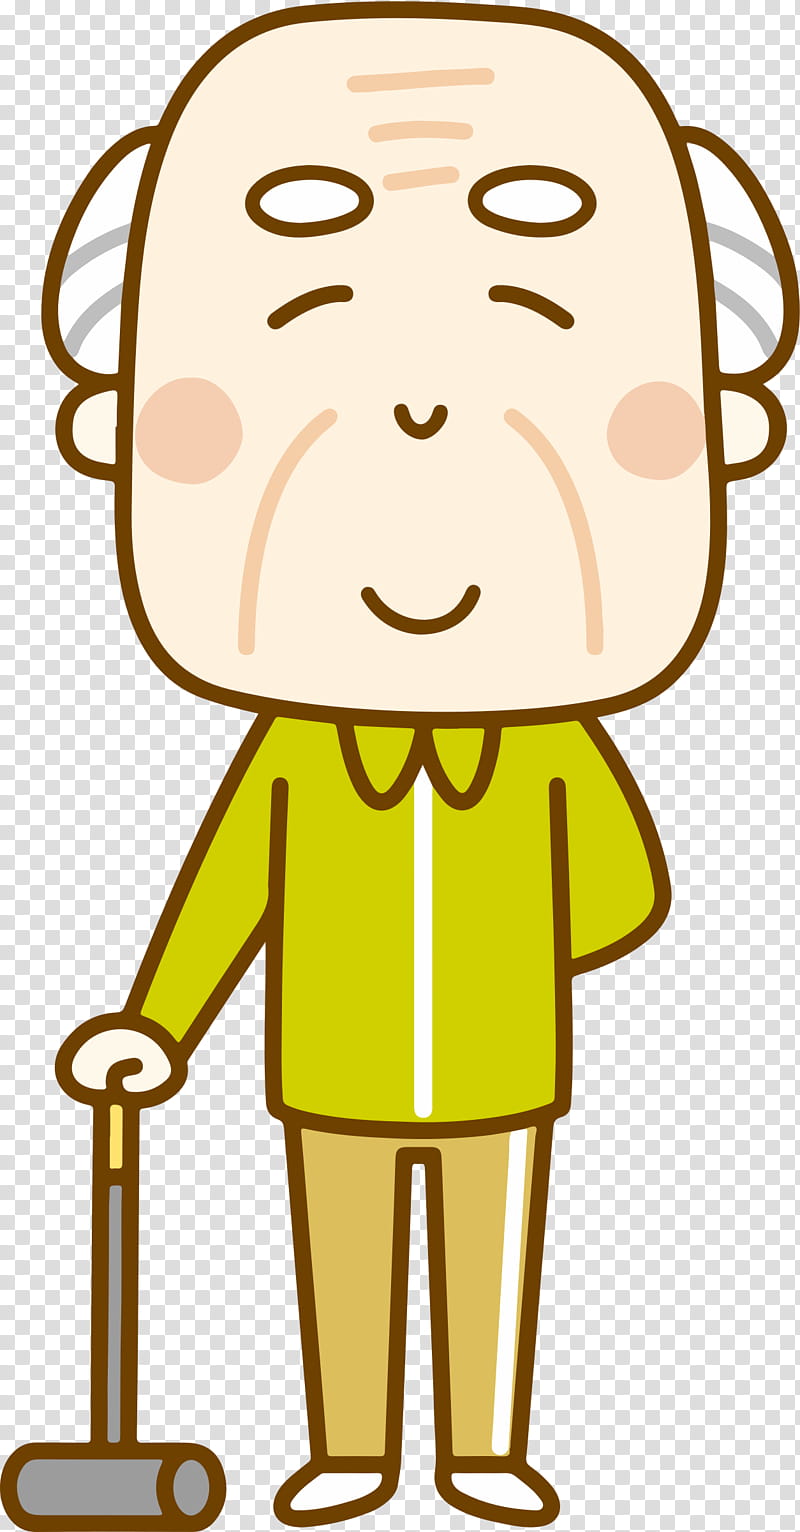 Creative, Grandparent, Cartoon, Old Age, Comics, Child, Face, Yellow transparent background PNG clipart